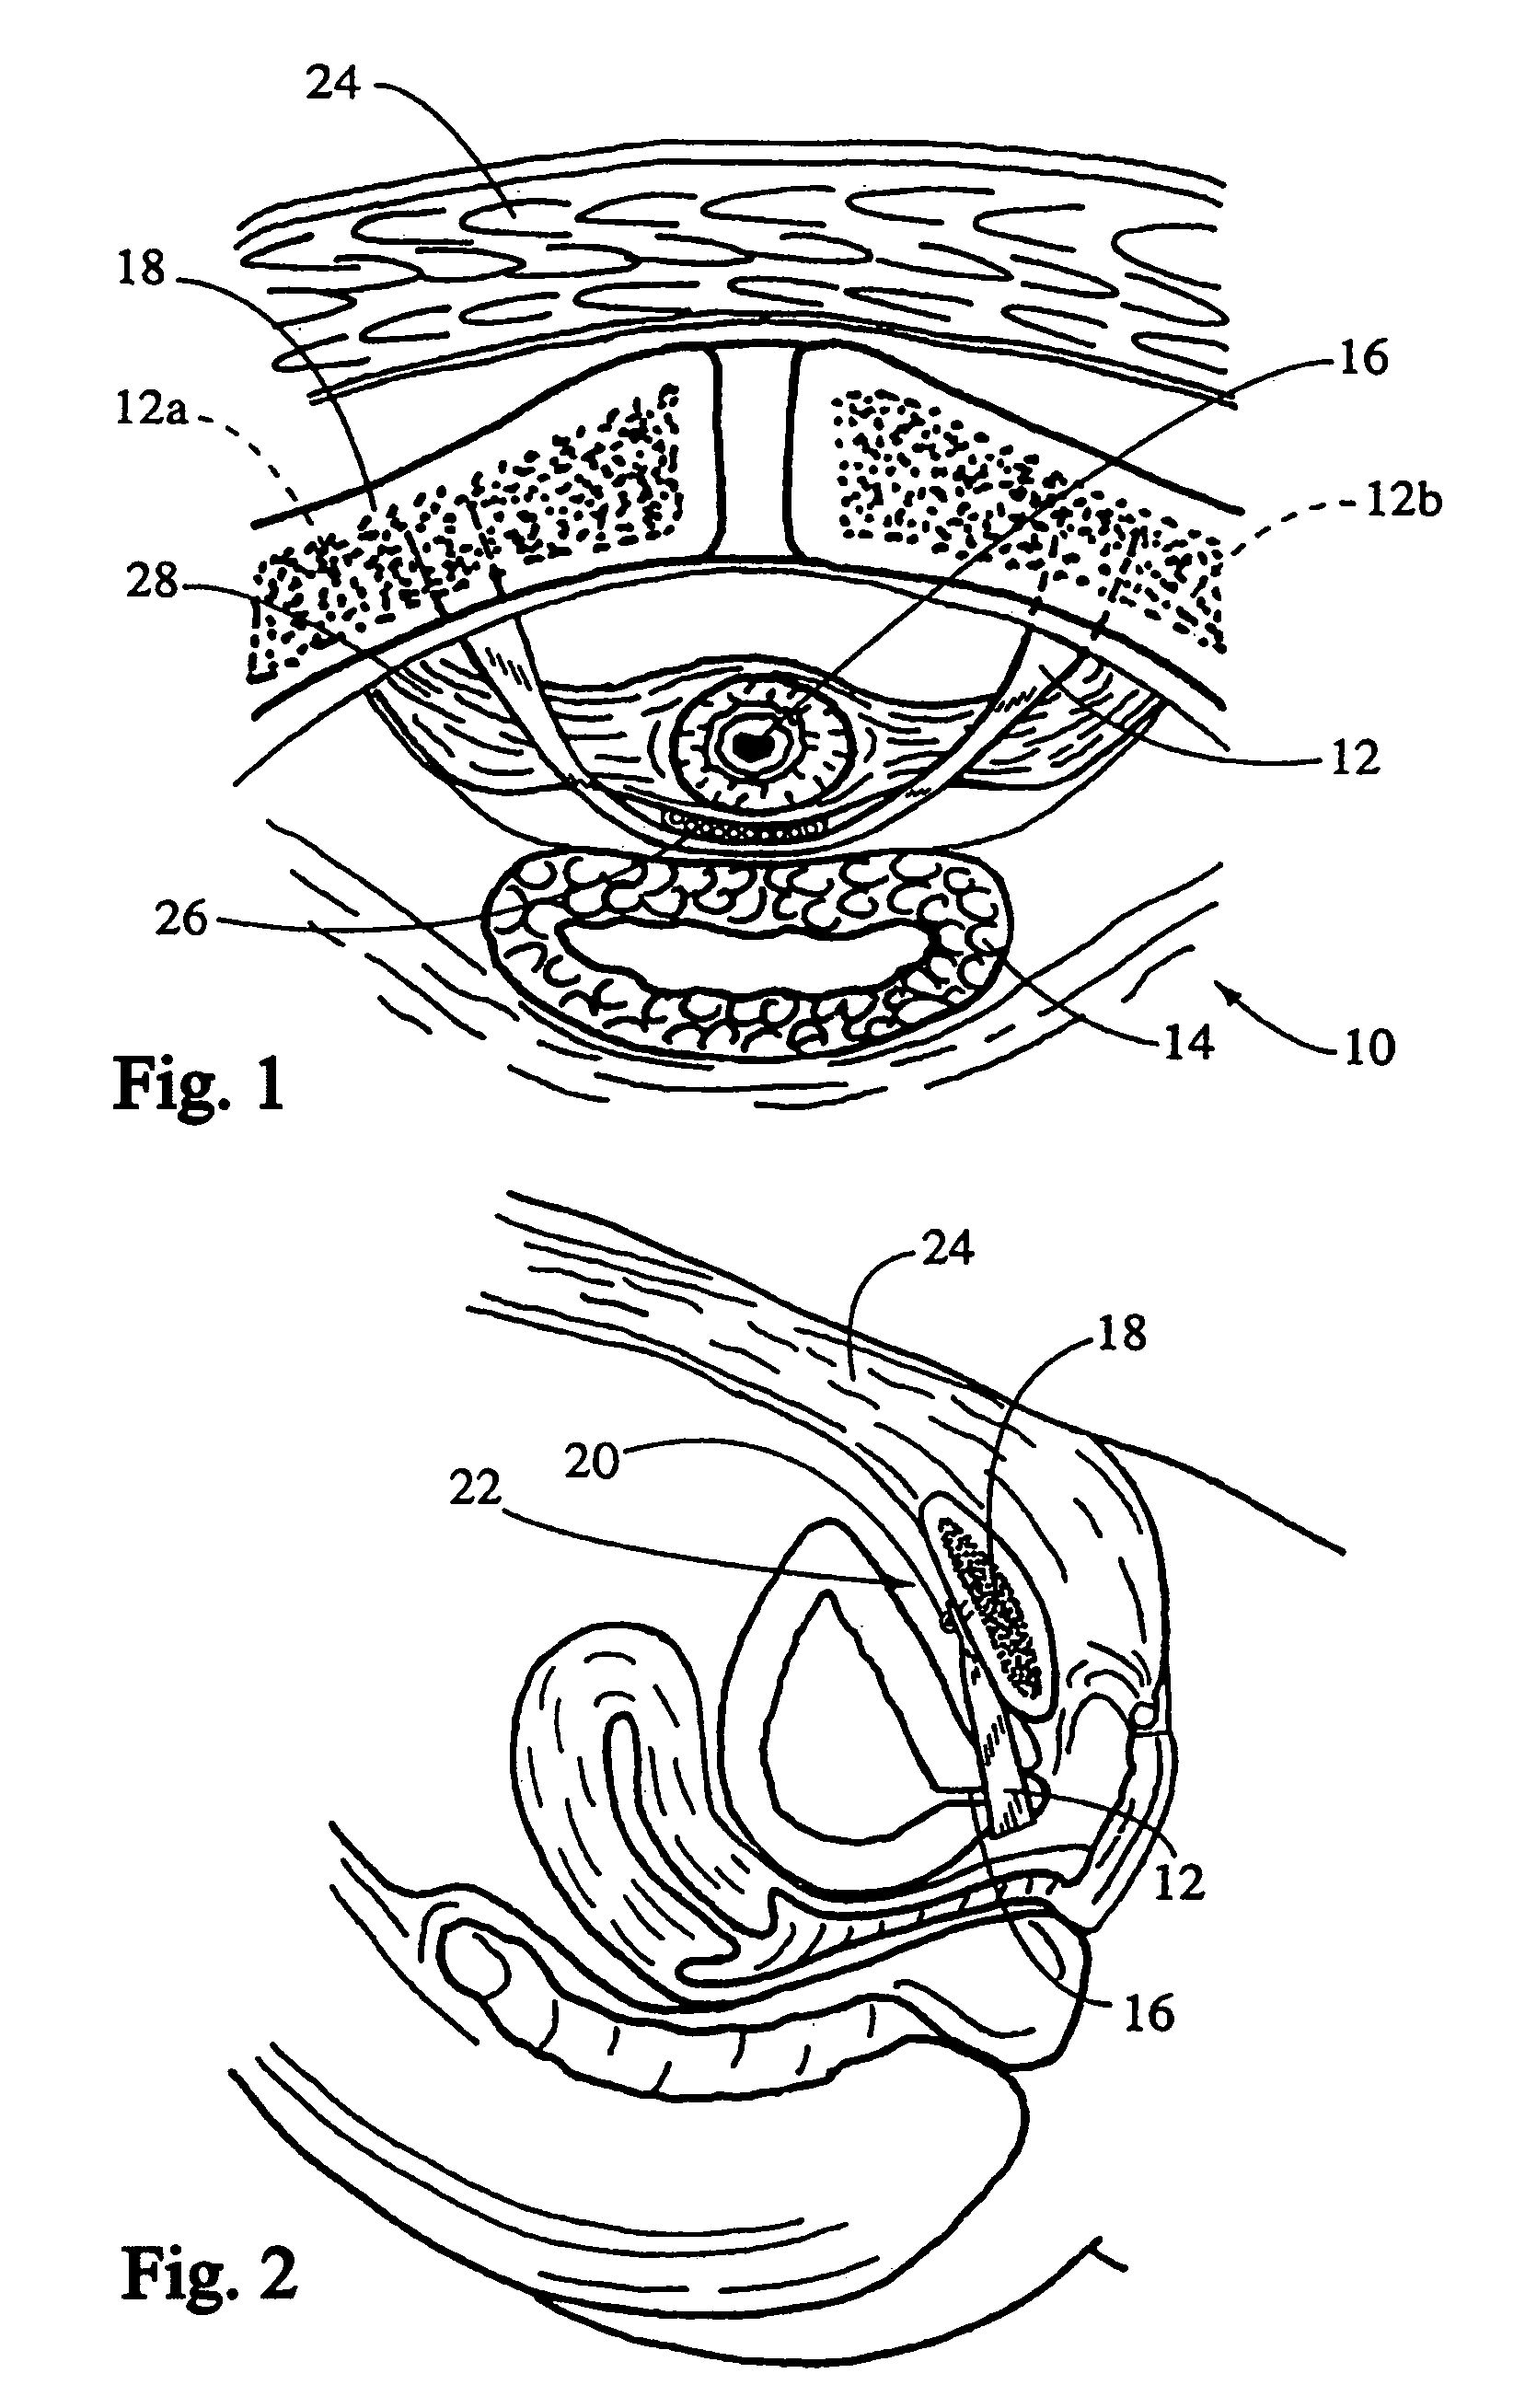 System for securing sutures, grafts and soft tissue to bone and periosteum